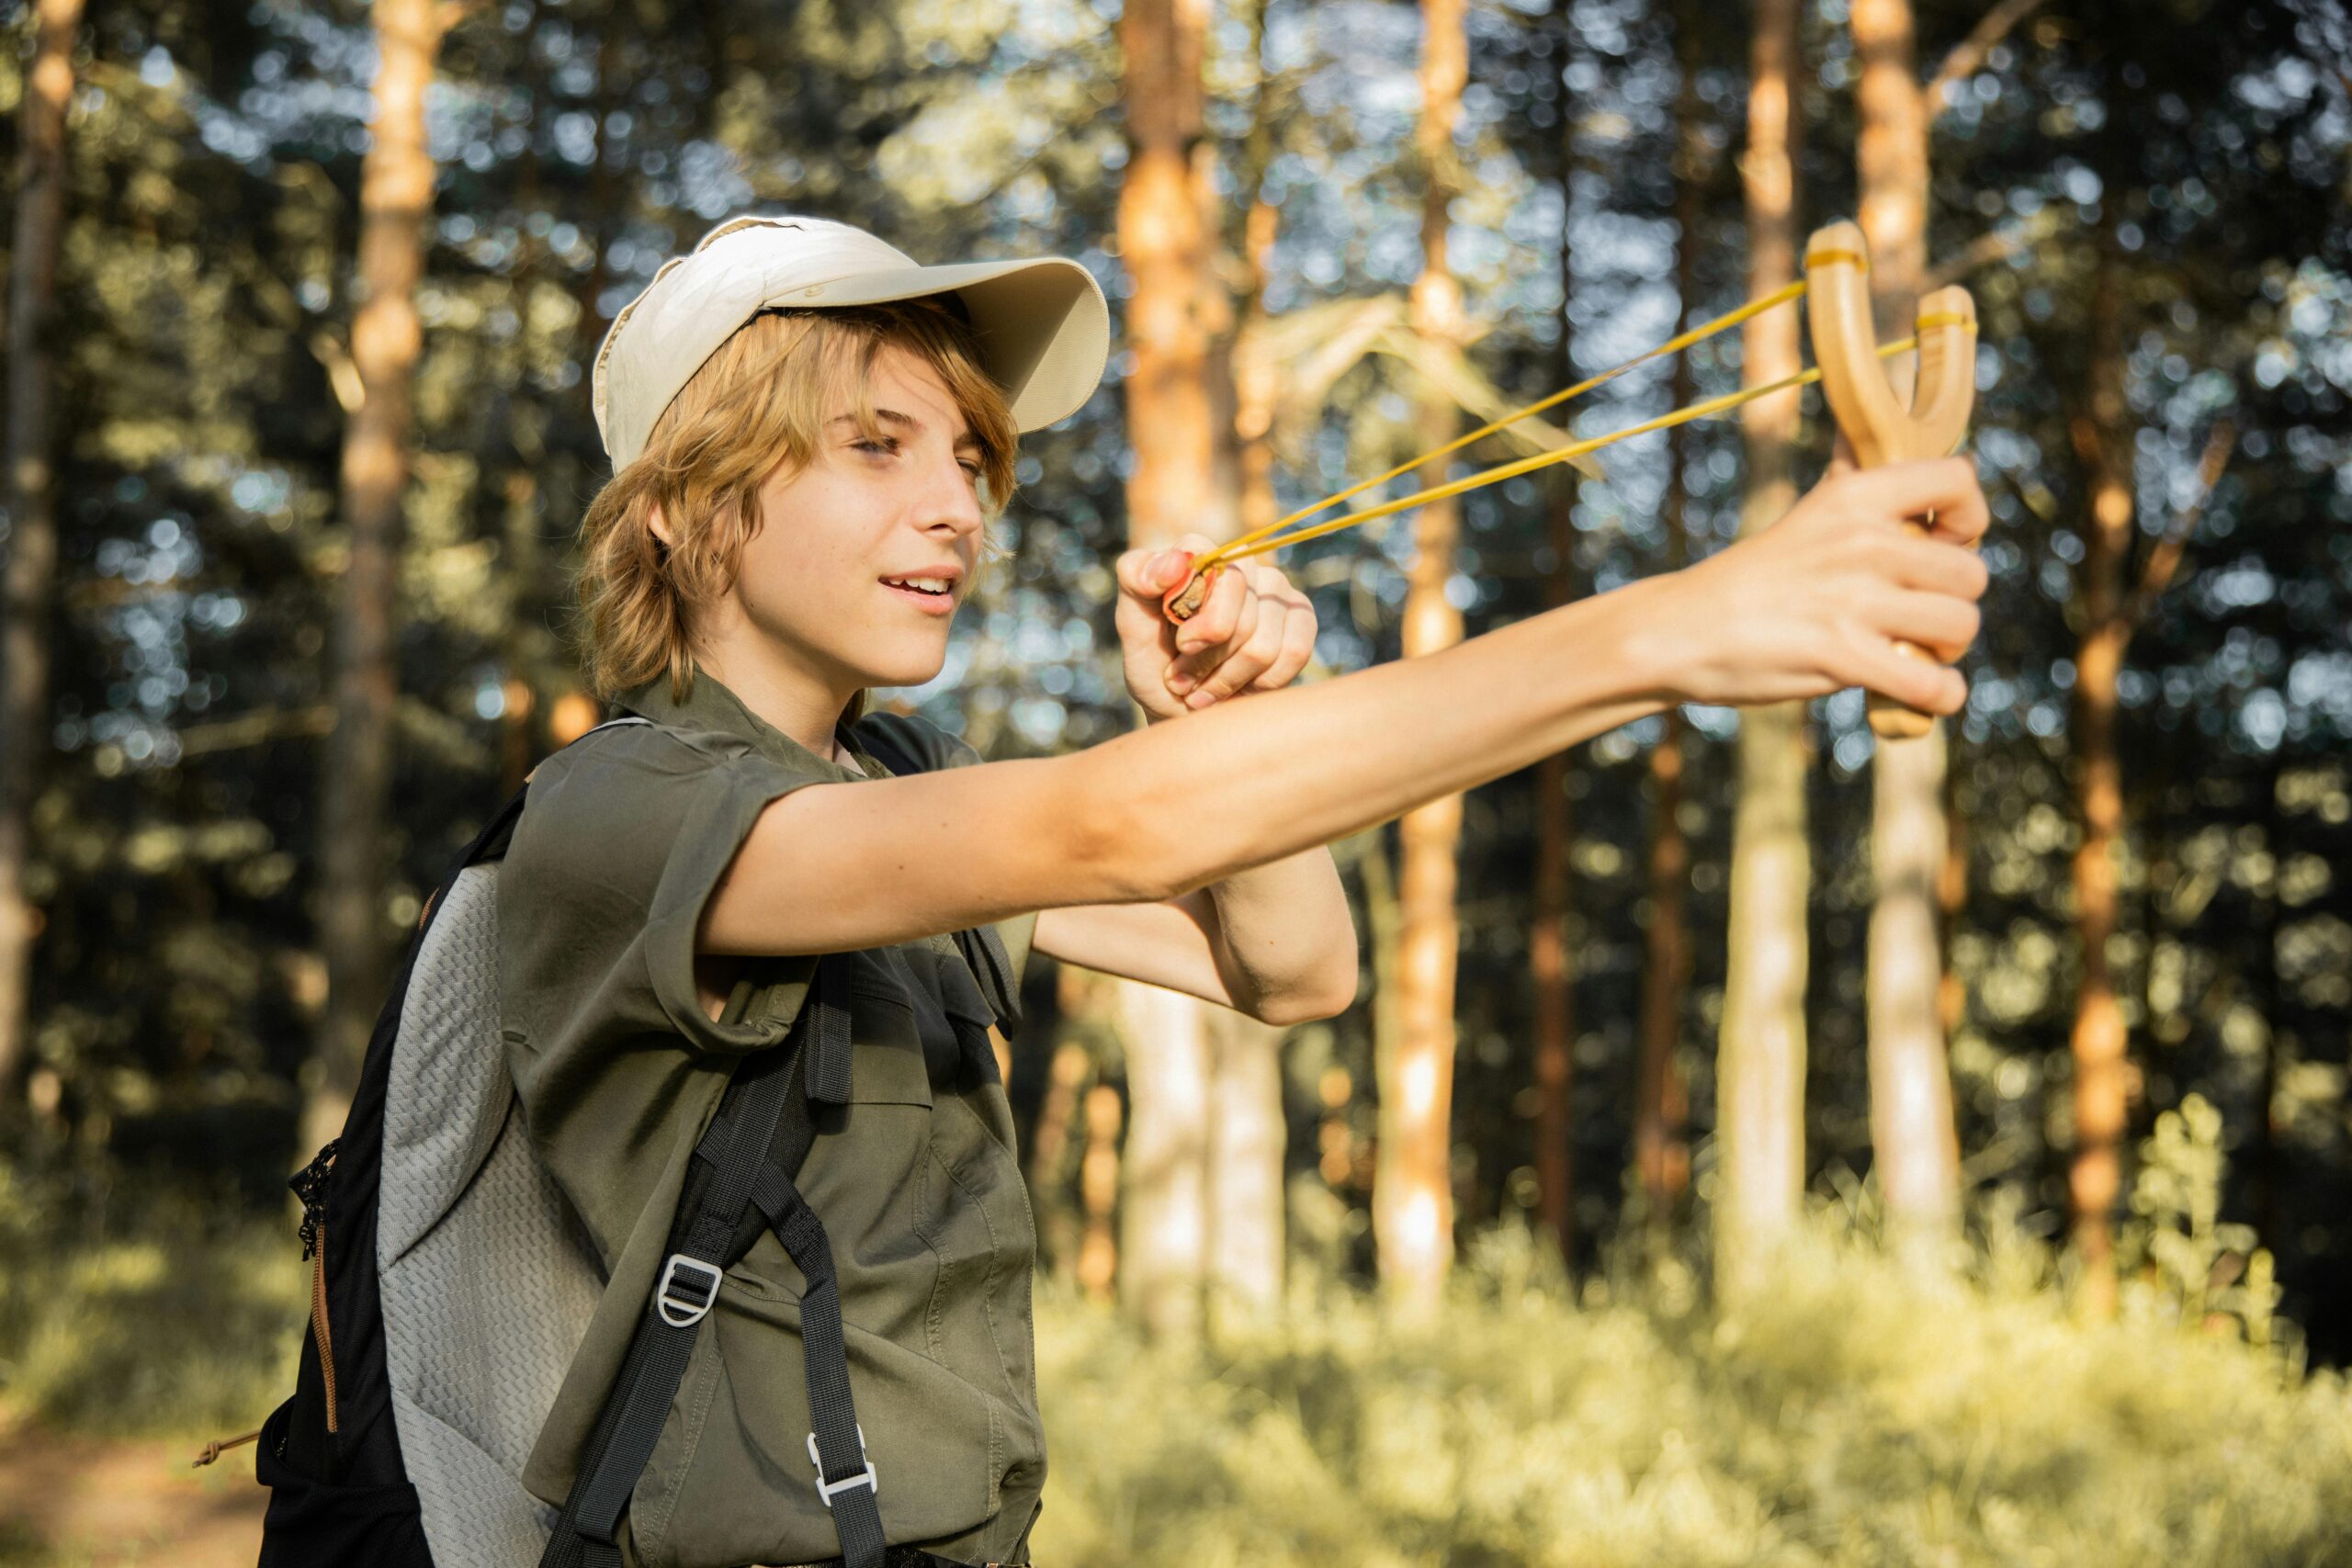 Photo by KATRIN BOLOVTSOVA: https://www.pexels.com/photo/teenager-on-an-adventure-in-a-forest-shooting-from-a-slingshot-5036754/